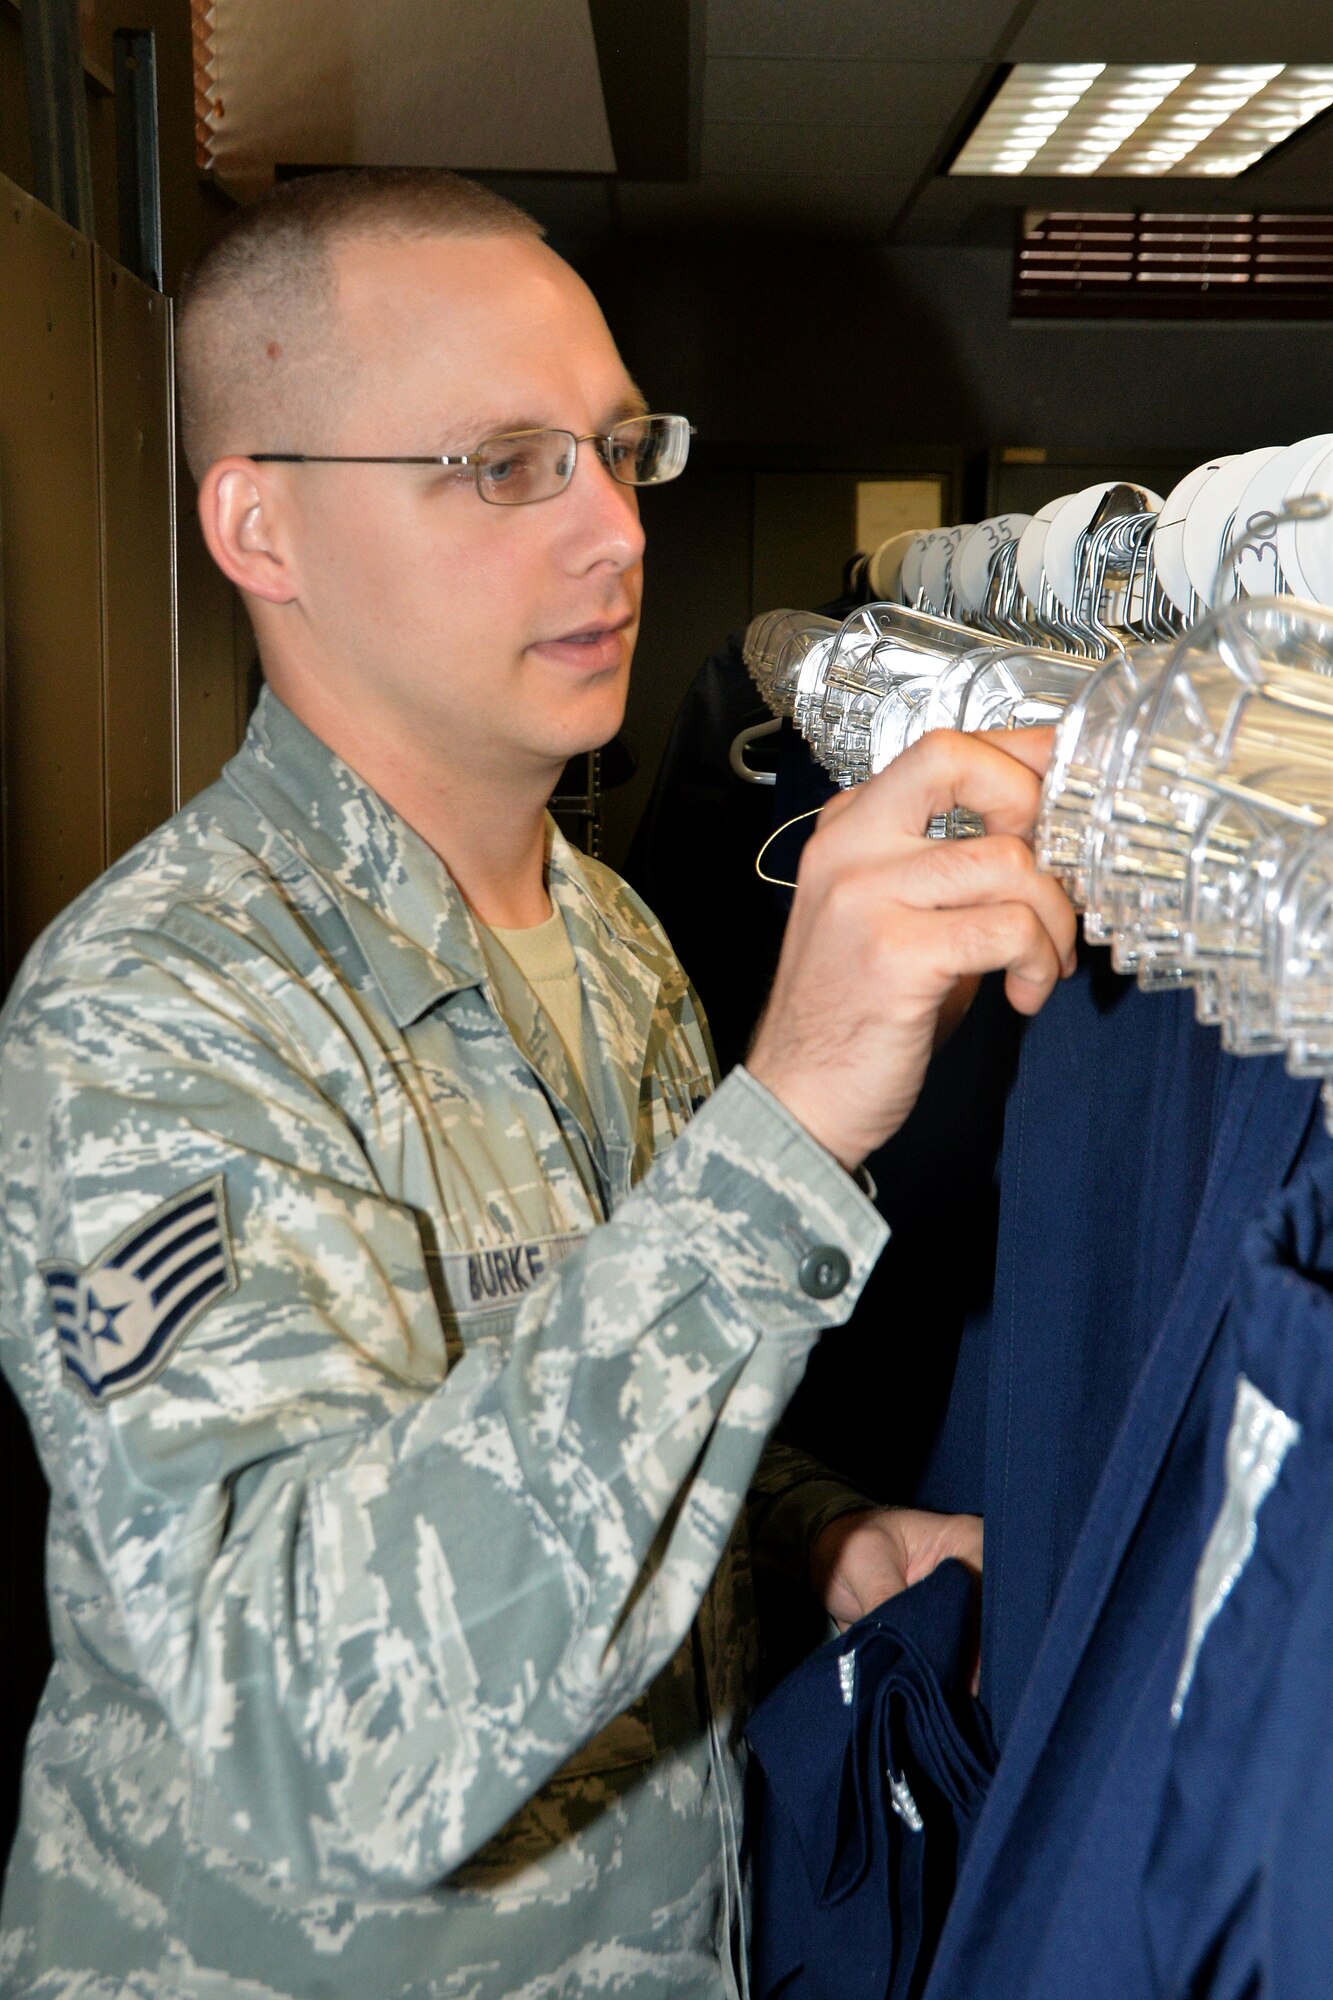 U.S. Air Force Staff Sgt. Christopher Burke’s, 55th Wing Honor Guard NCO in charge, organizes a clothing rack full of Honor Guard uniforms Aug. 7 at Offutt Air Force Base, Nebraska. Burke invested approximately $500 in organizing the uniform supply closet and has saved the Air Force more than $15,000. (U.S. Air Force photo by Dana P. Heard)